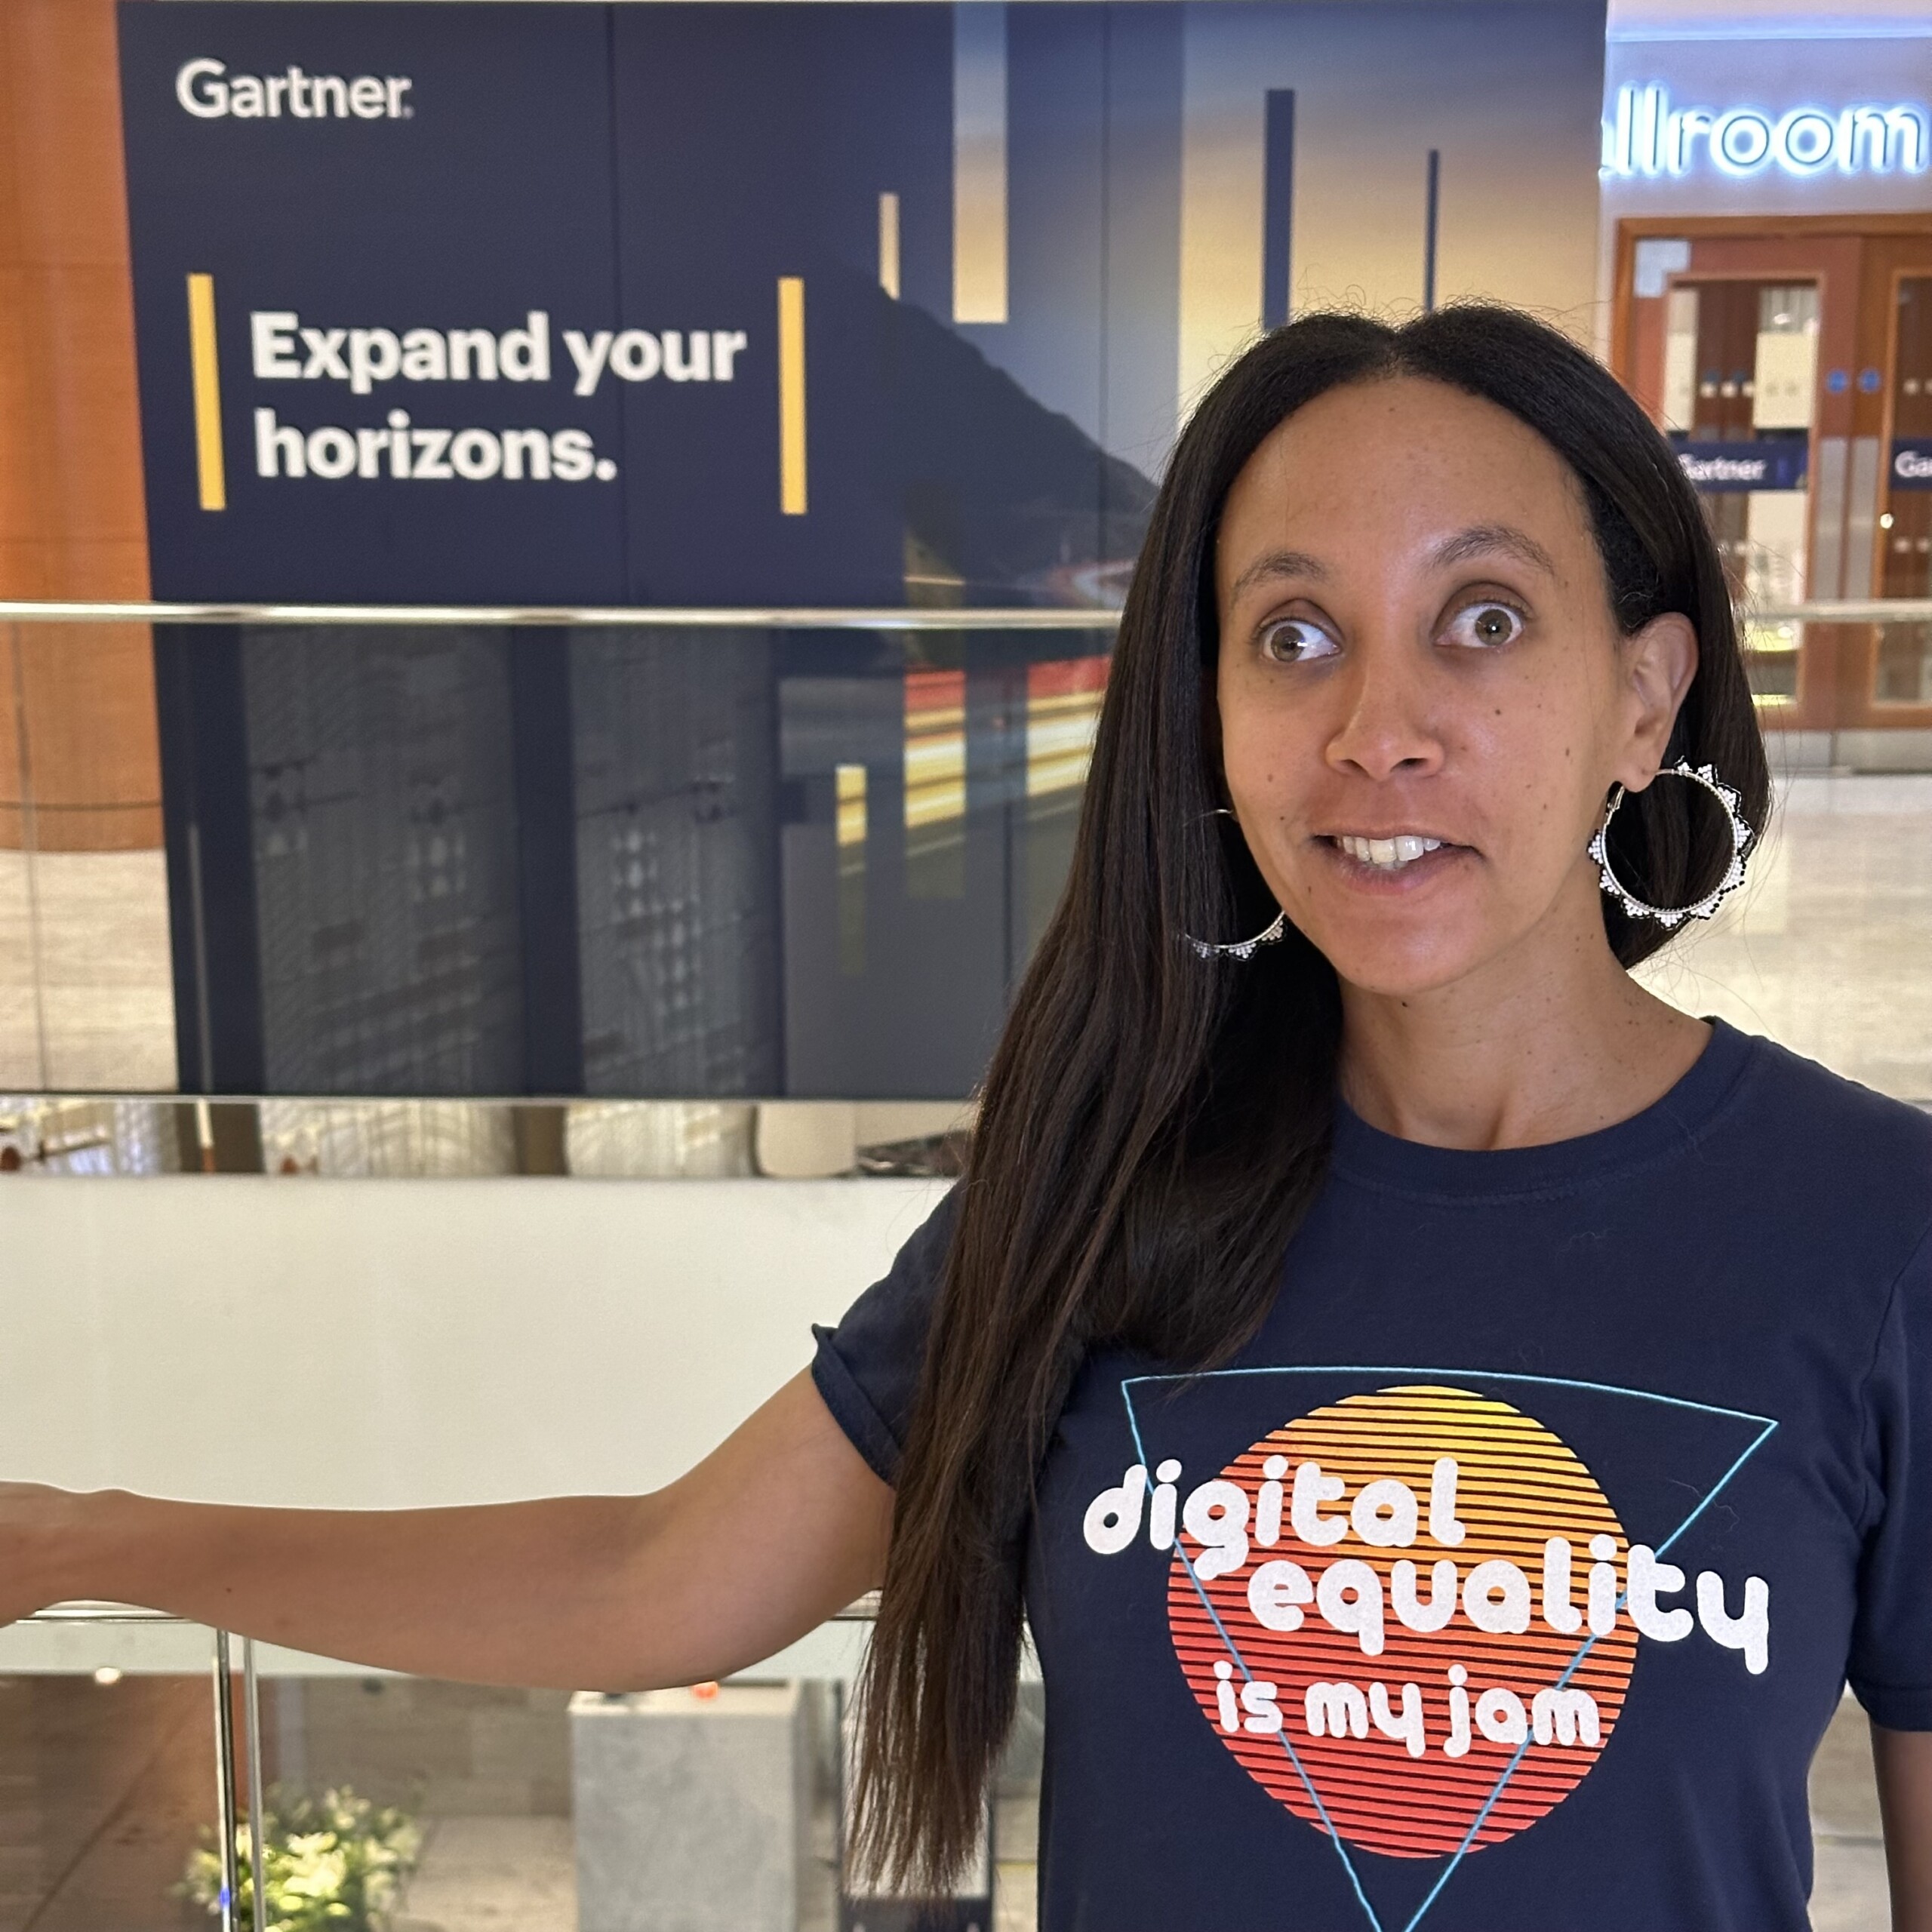 I’m smiling and wearing a shirt with text that says, “Digital equality is my jam.” Behind me, across the hotel lobby, a large Gartner sign with a stylized coastline reads, “Expand your horizons.”